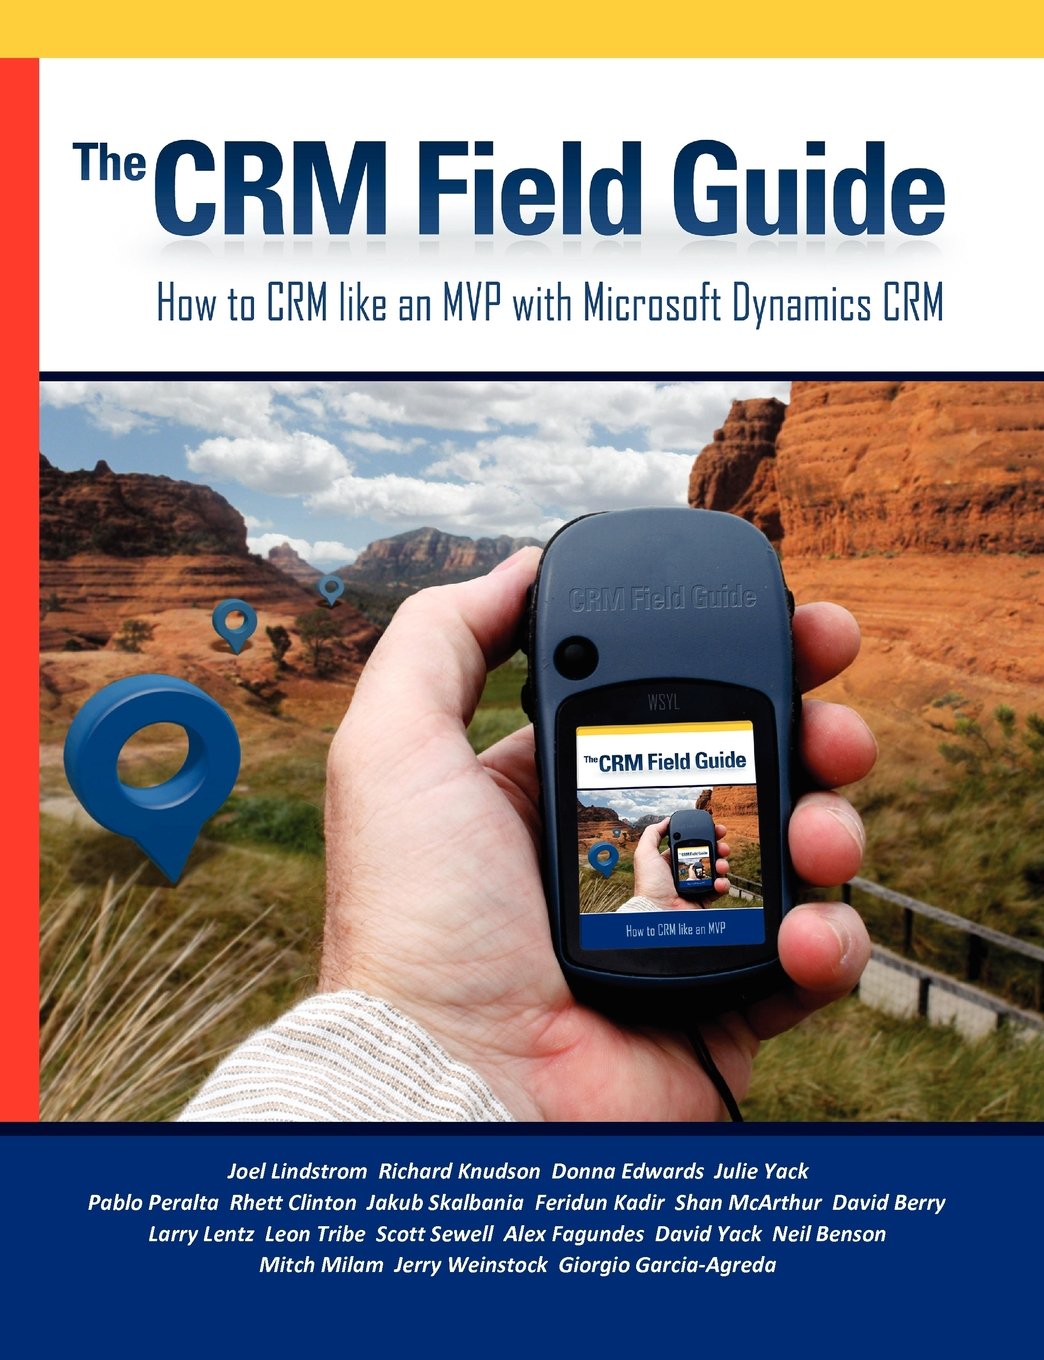 The CRM Field Guide